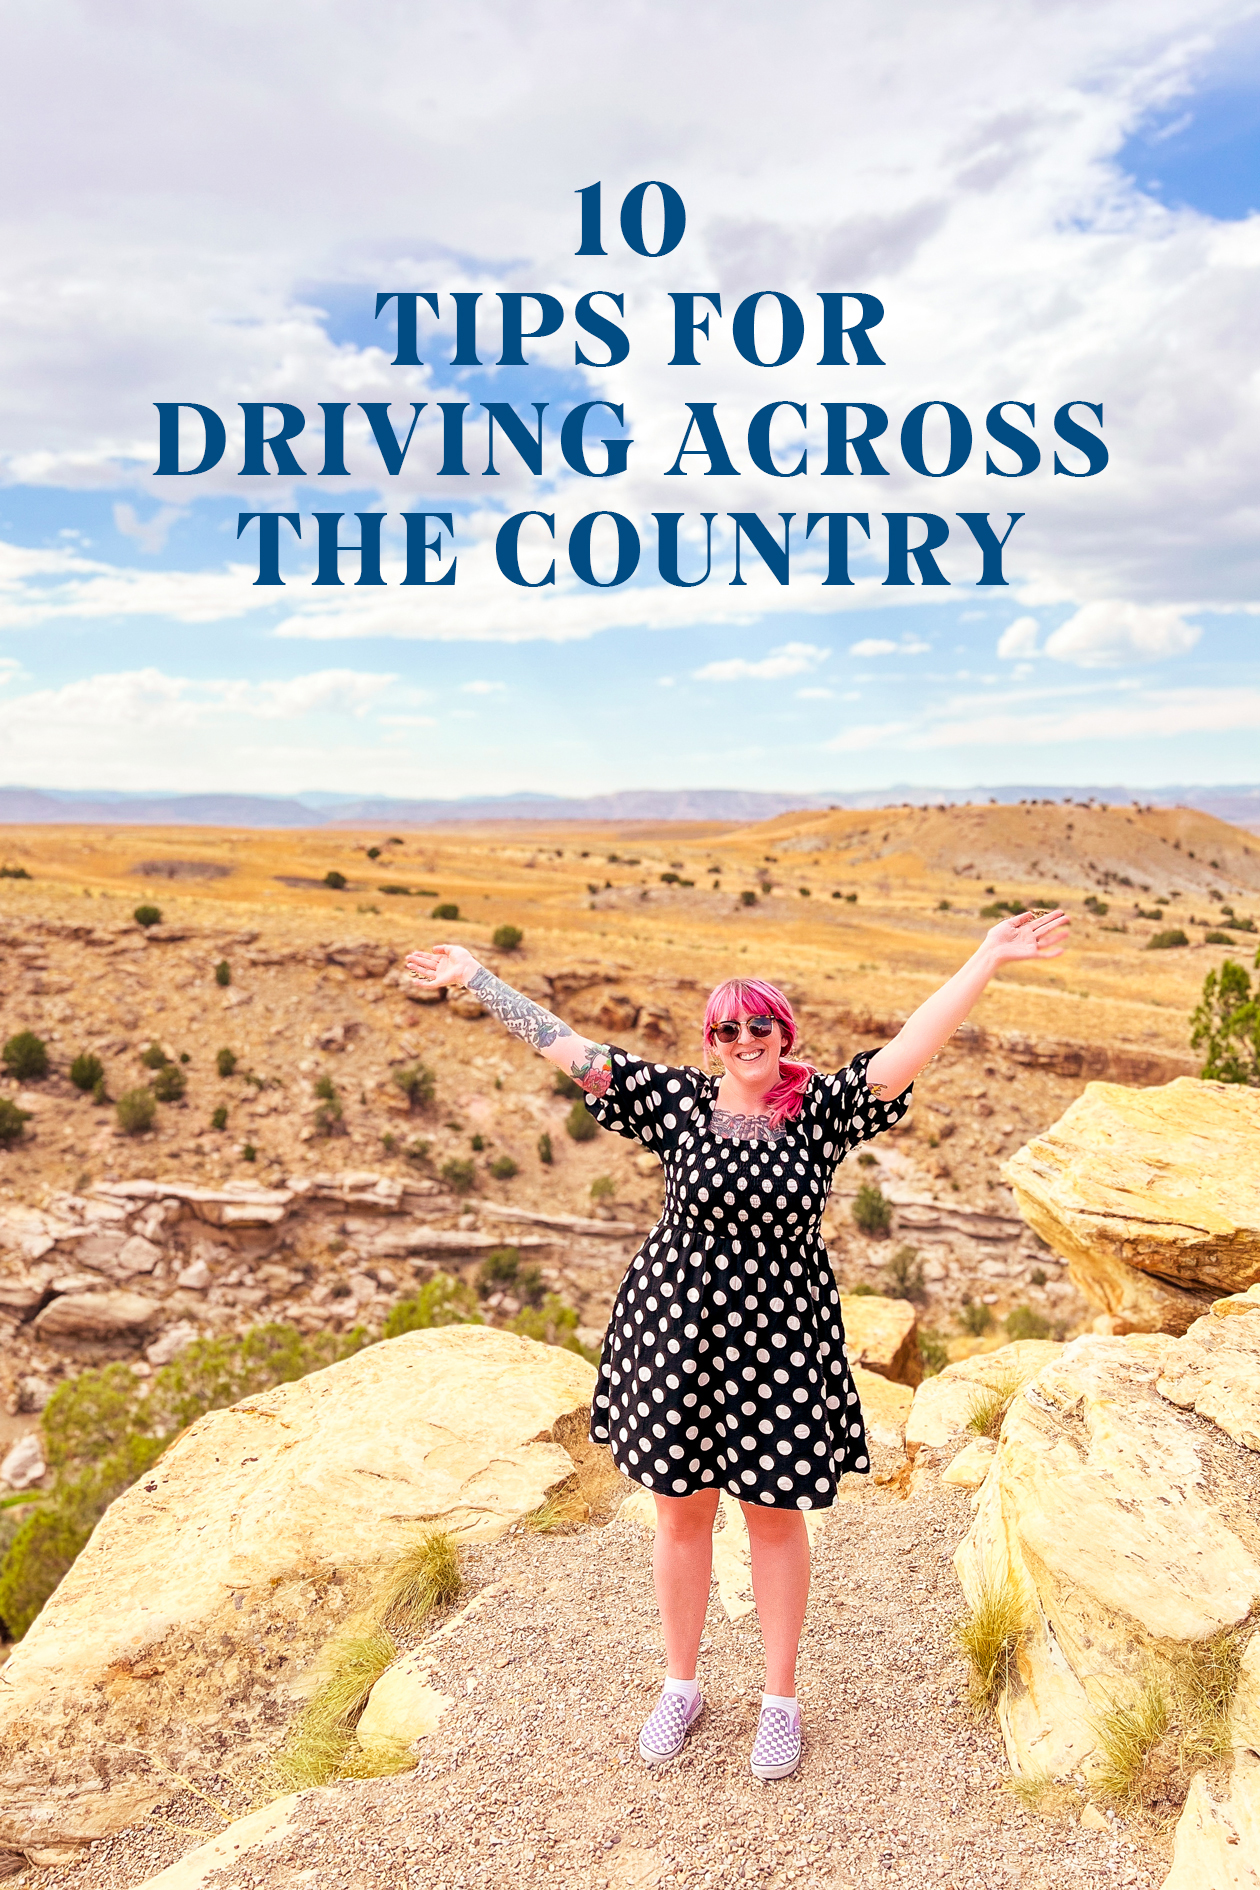 How to Plan a Road Trip | 10 Tips for Driving Across the Country